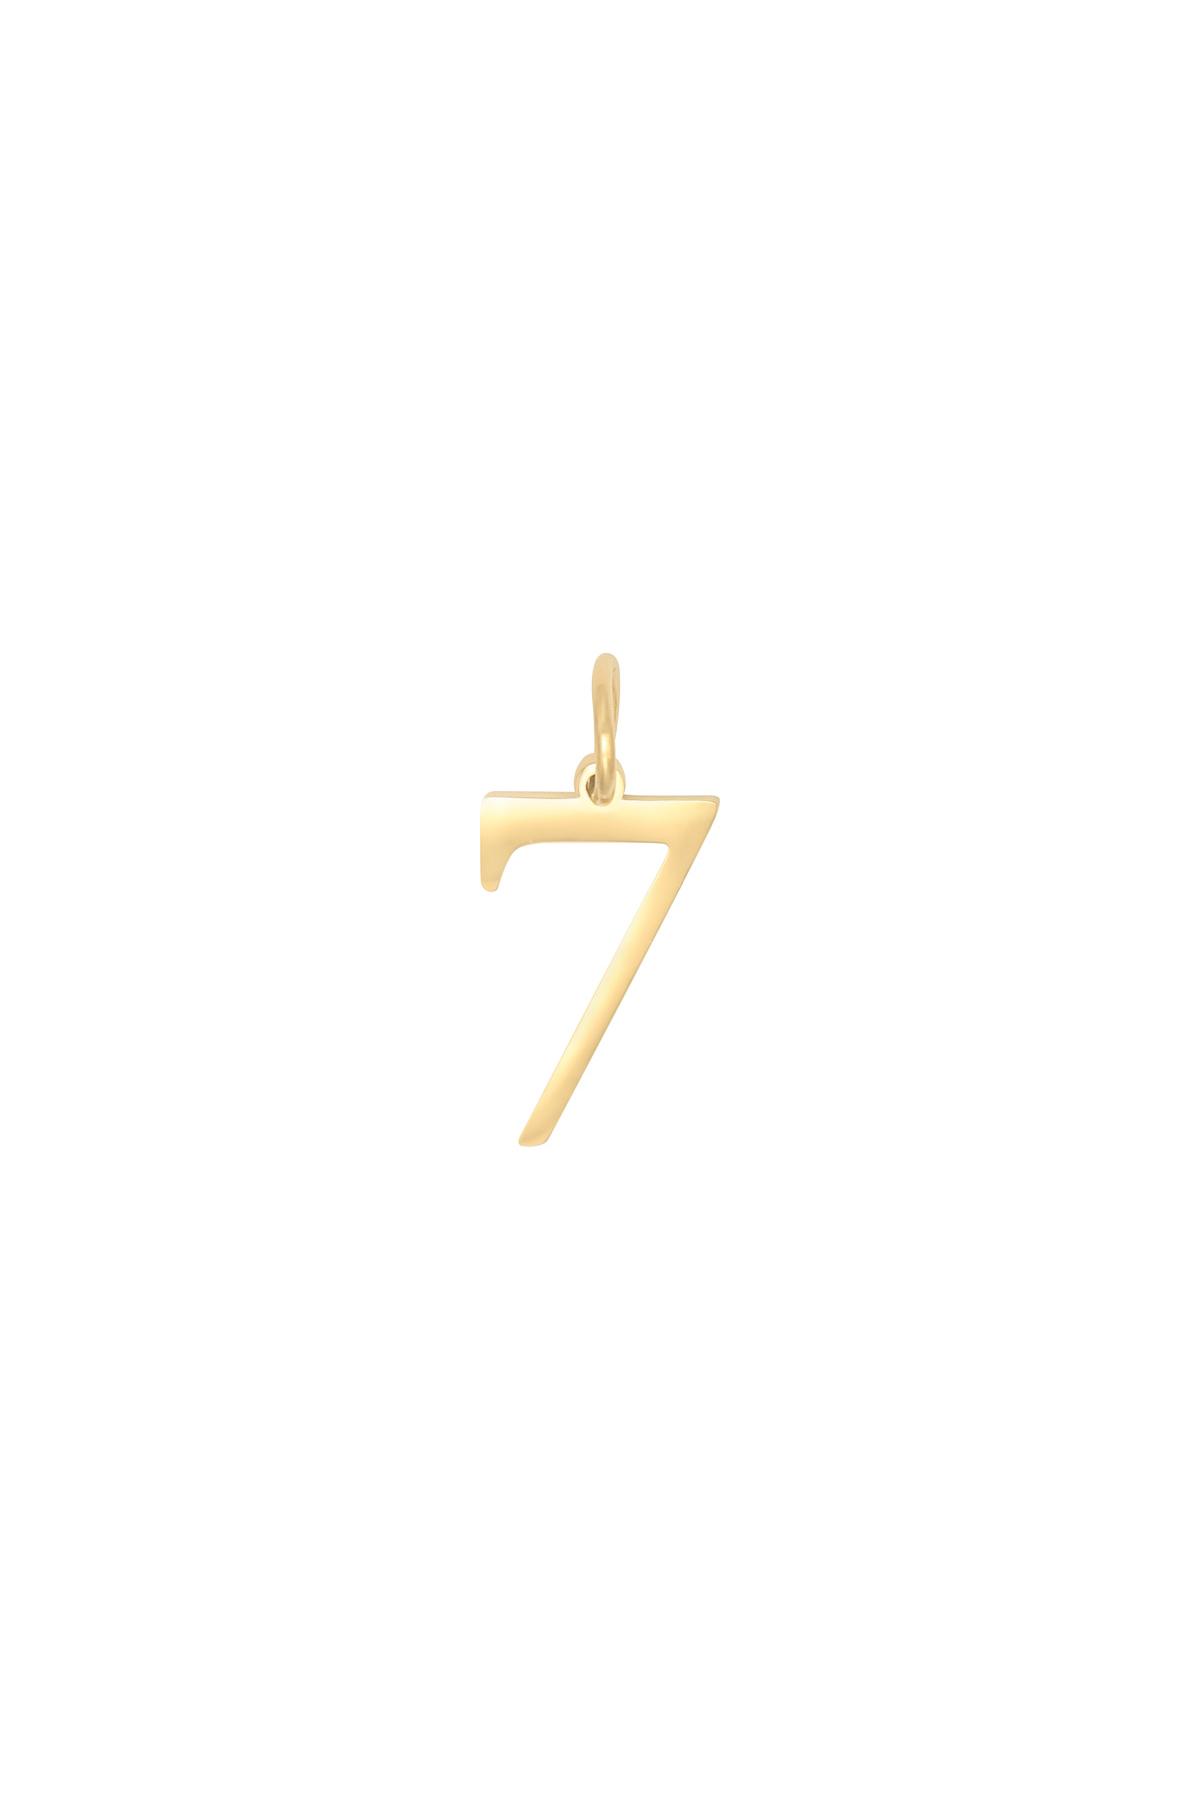 Gold / DIY Charm Digits Gold - 7 Stainless Steel Picture3